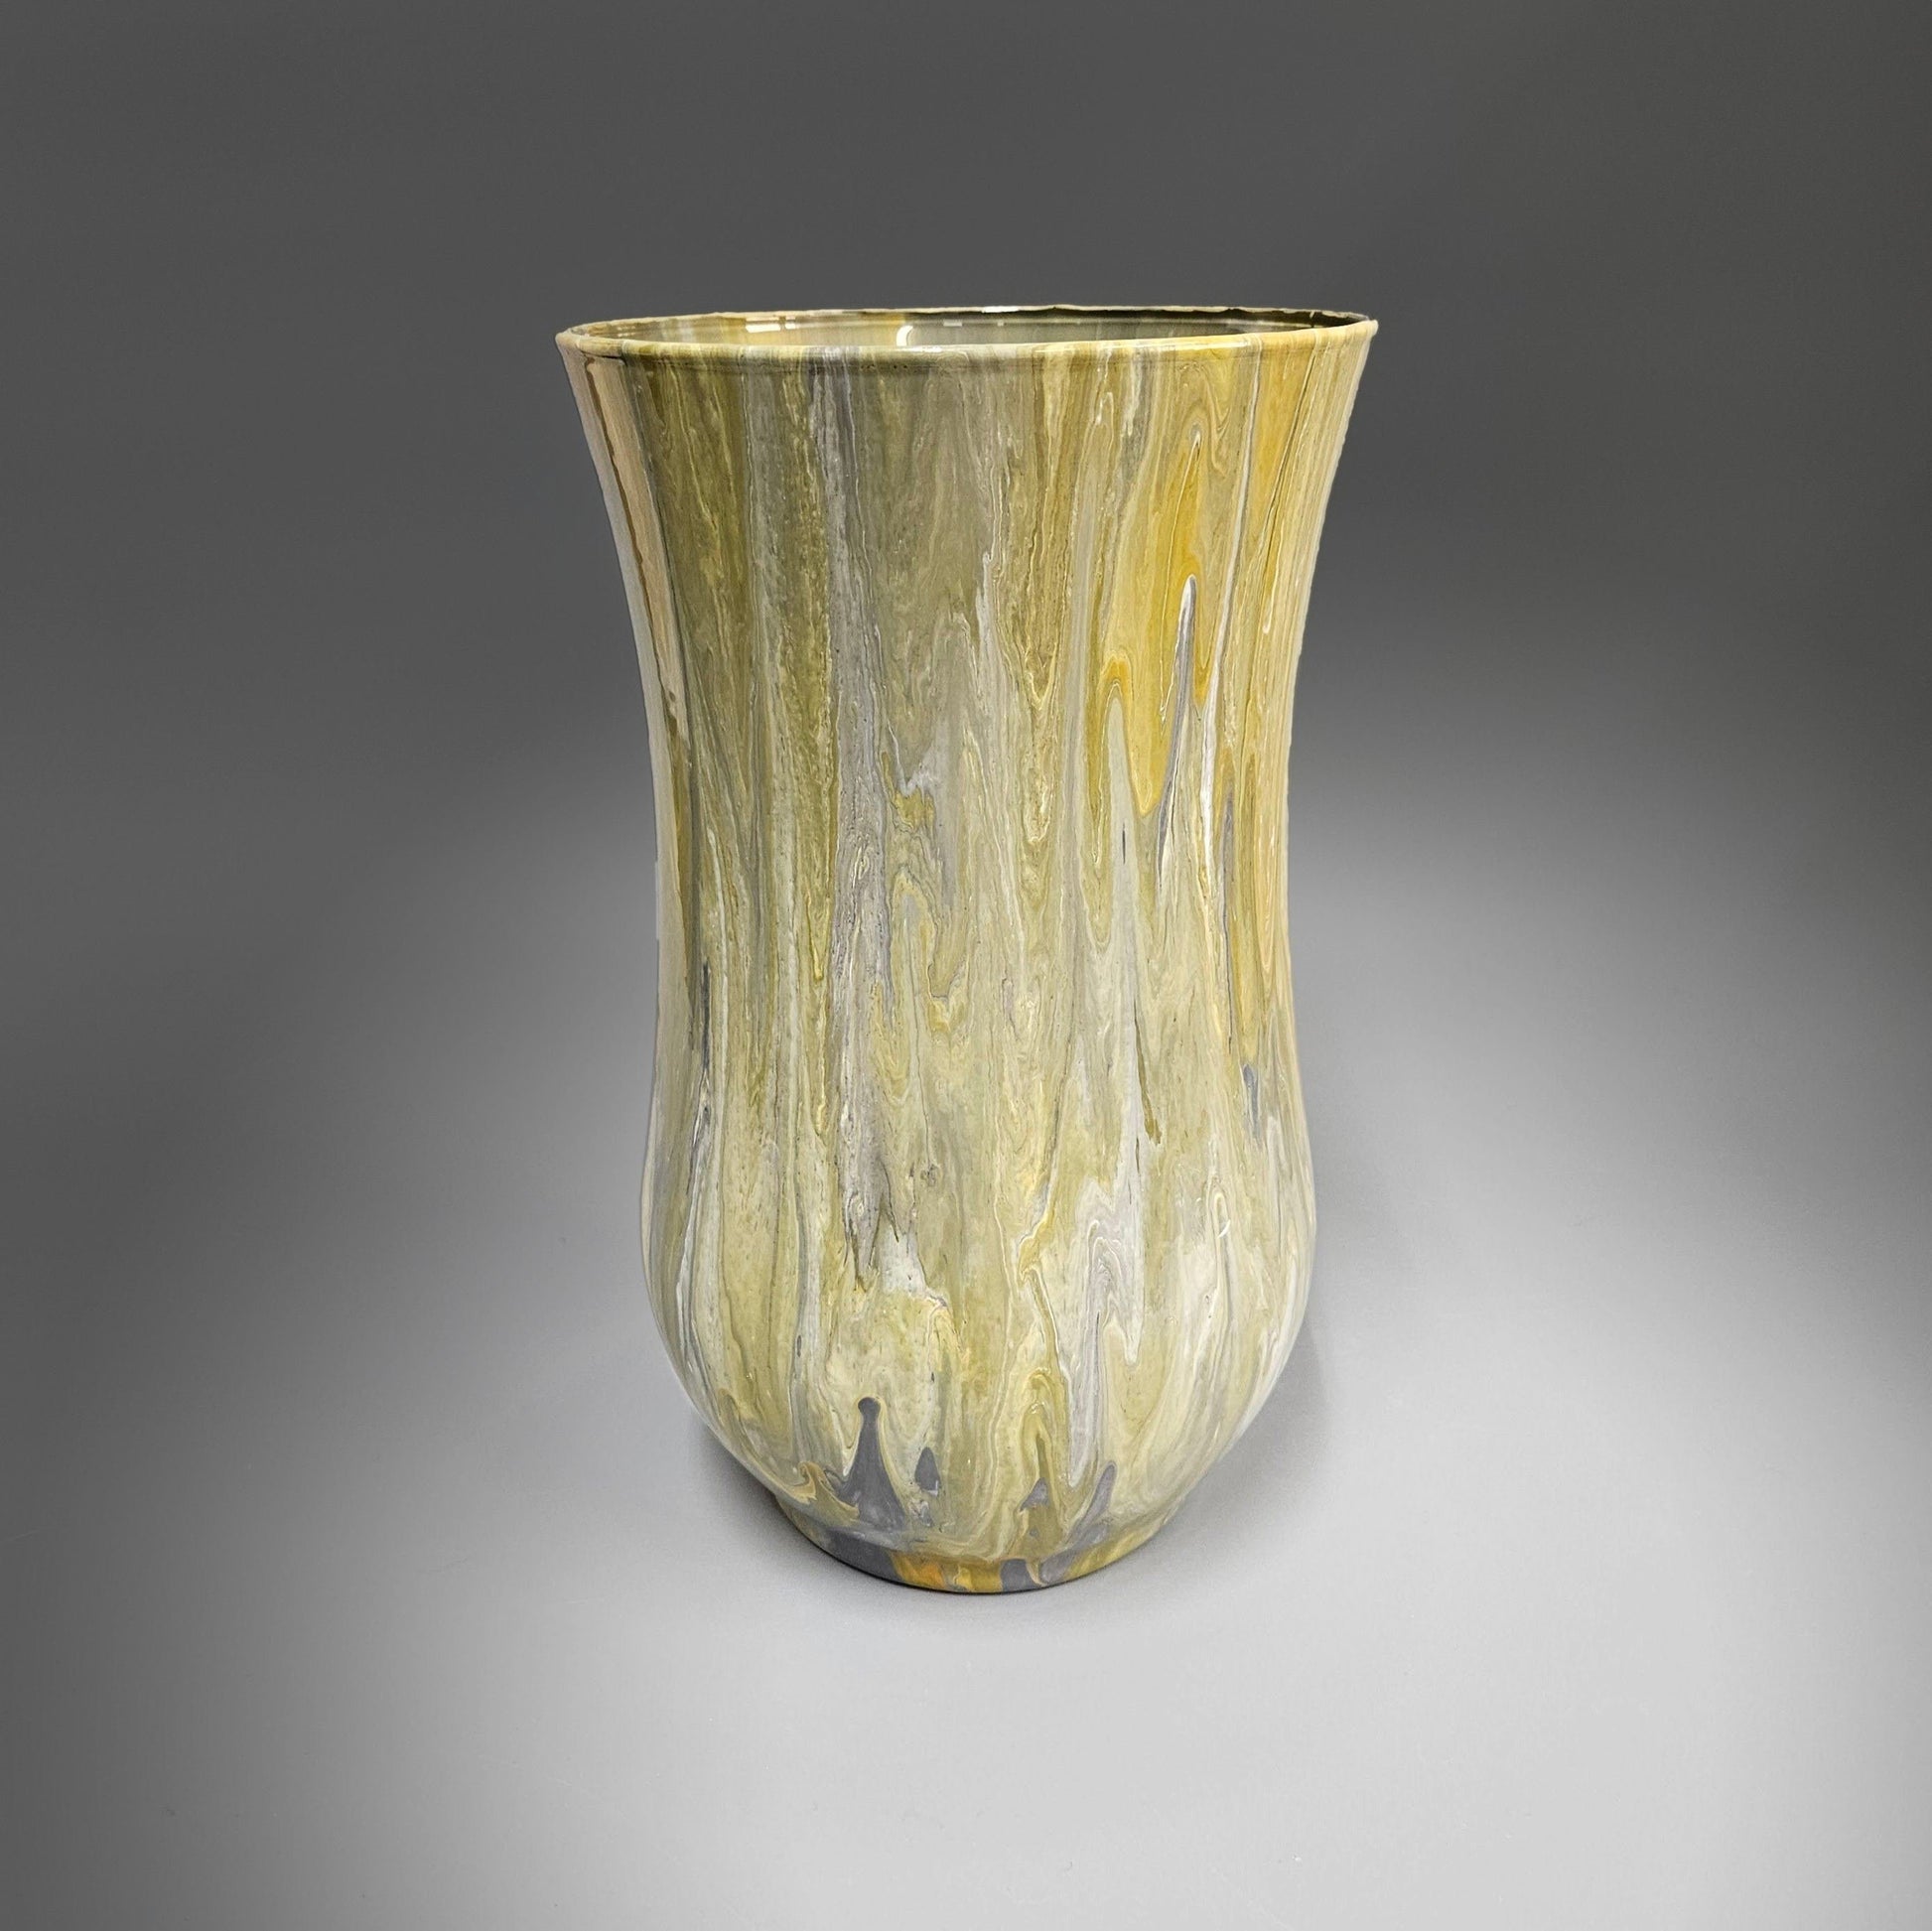 Glass Art Painted Hurricane Vase Centerpiece in Tan Gray and White 